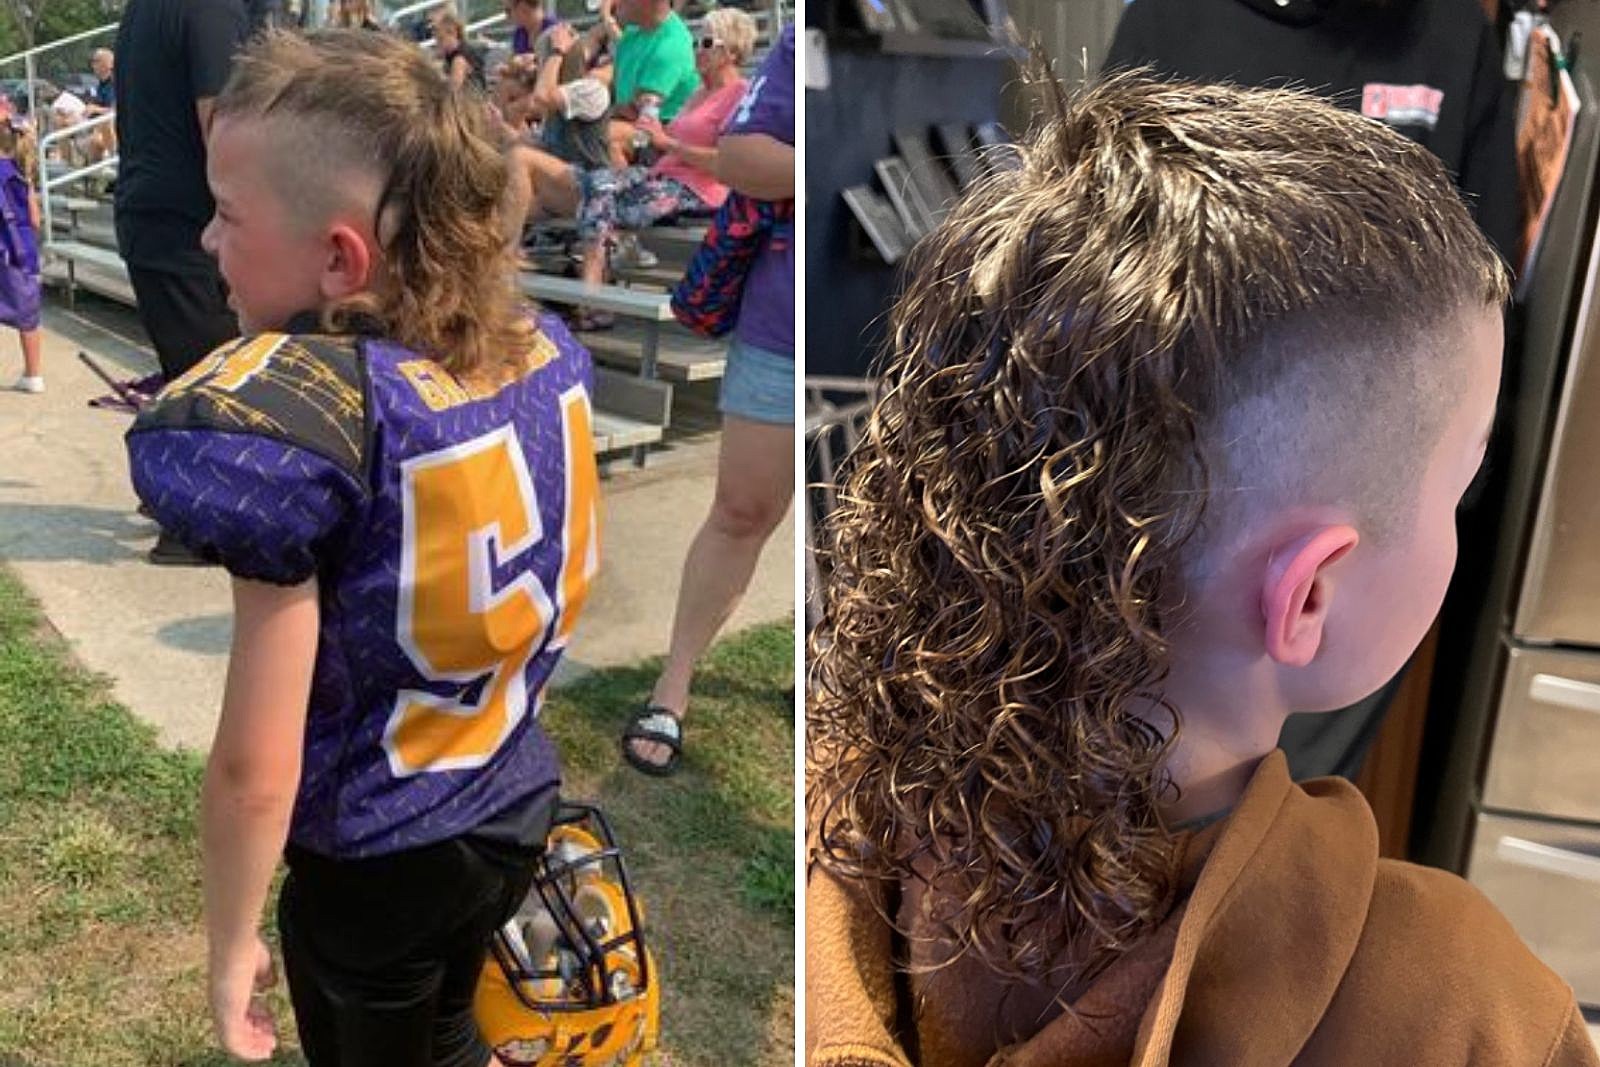 Mullet mania makes a return to area baseball fields